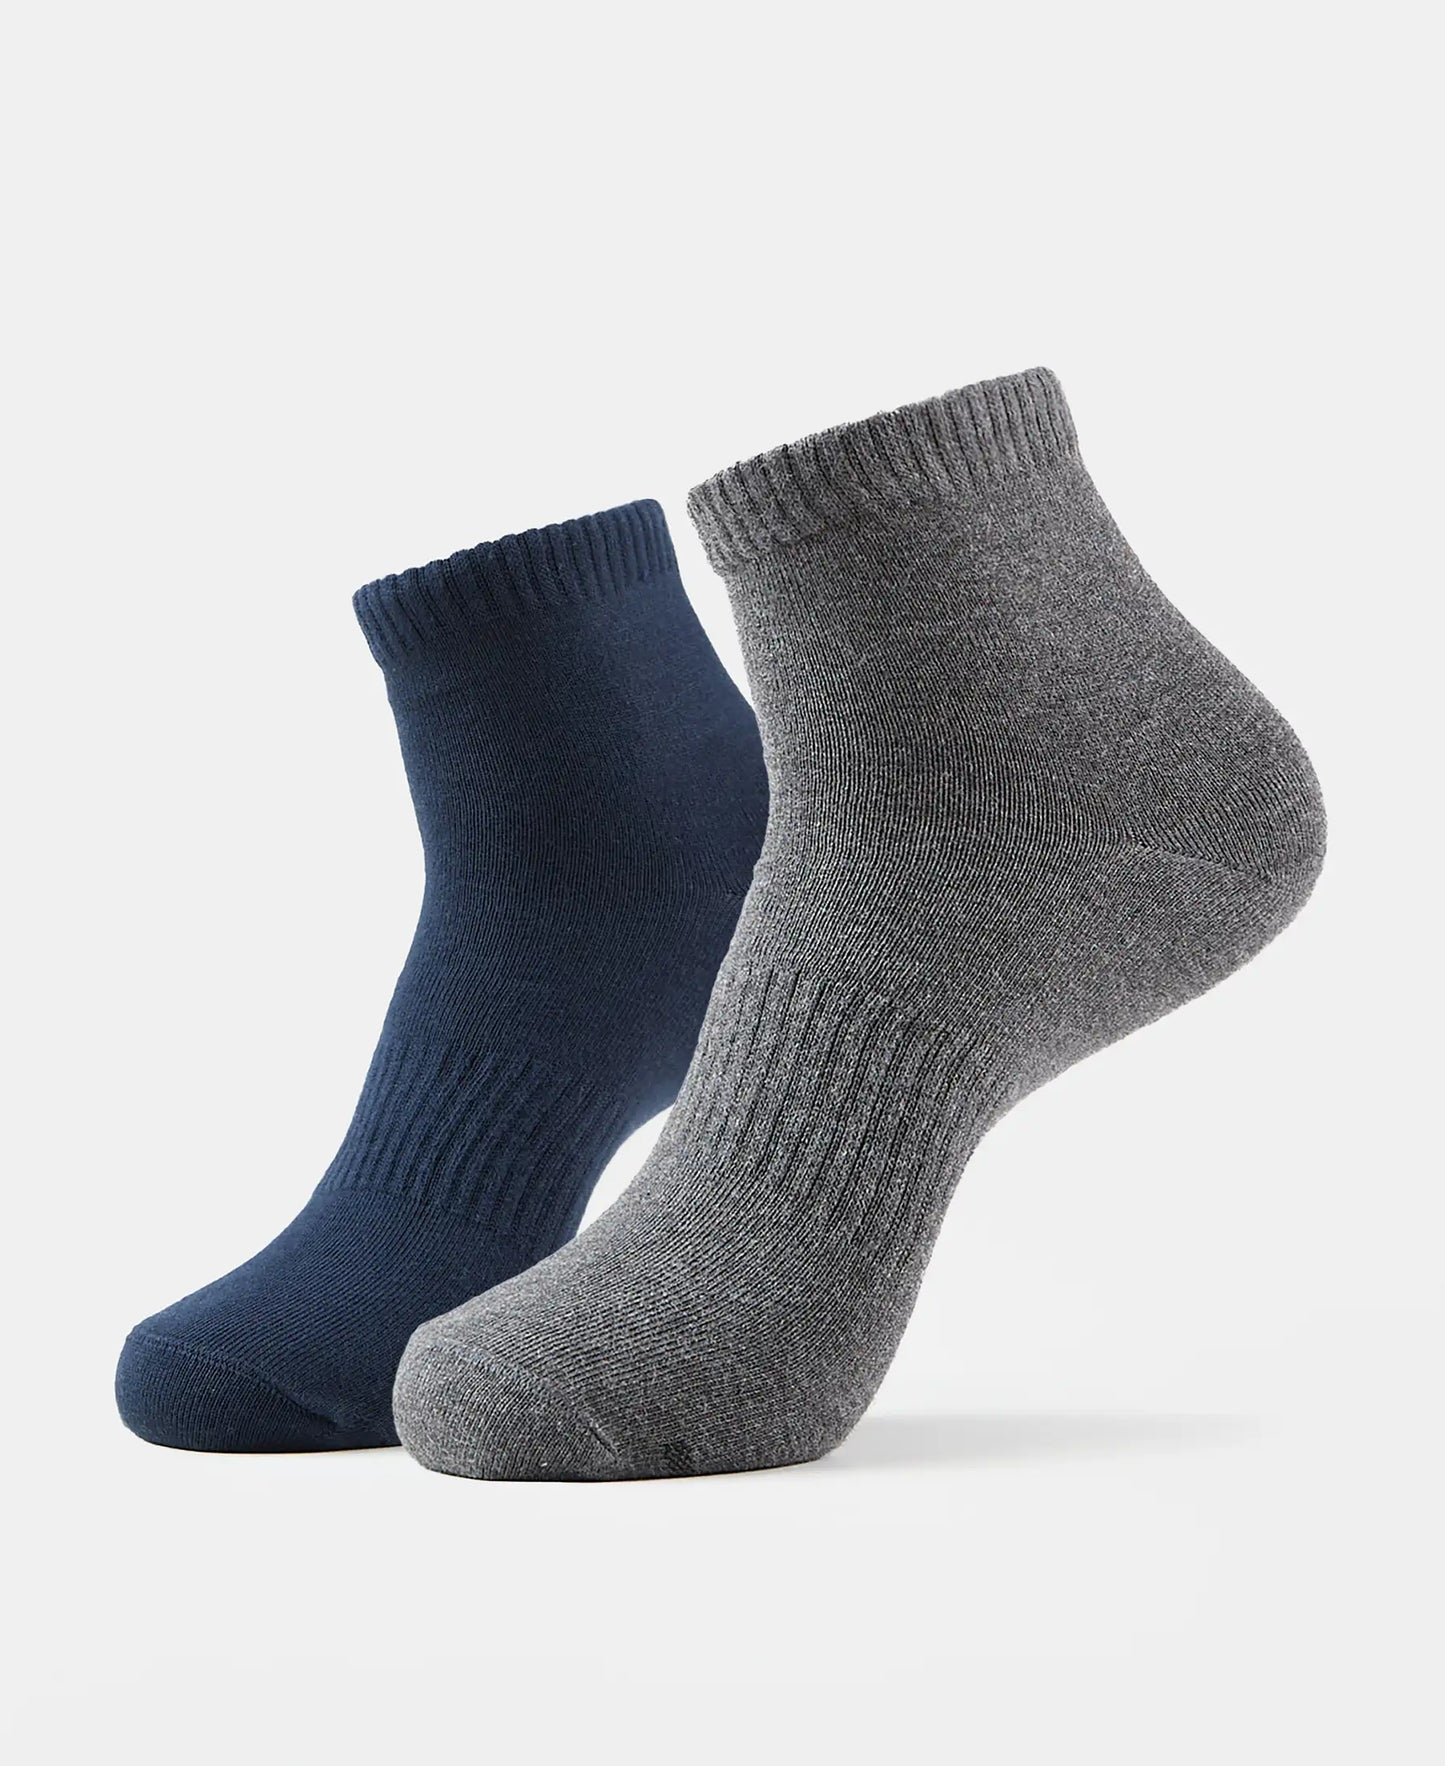 Compact Cotton Elastane Stretch Ankle Length Socks With StayFresh Treatment - Navy & Charcoal Melange (Pack of 2)